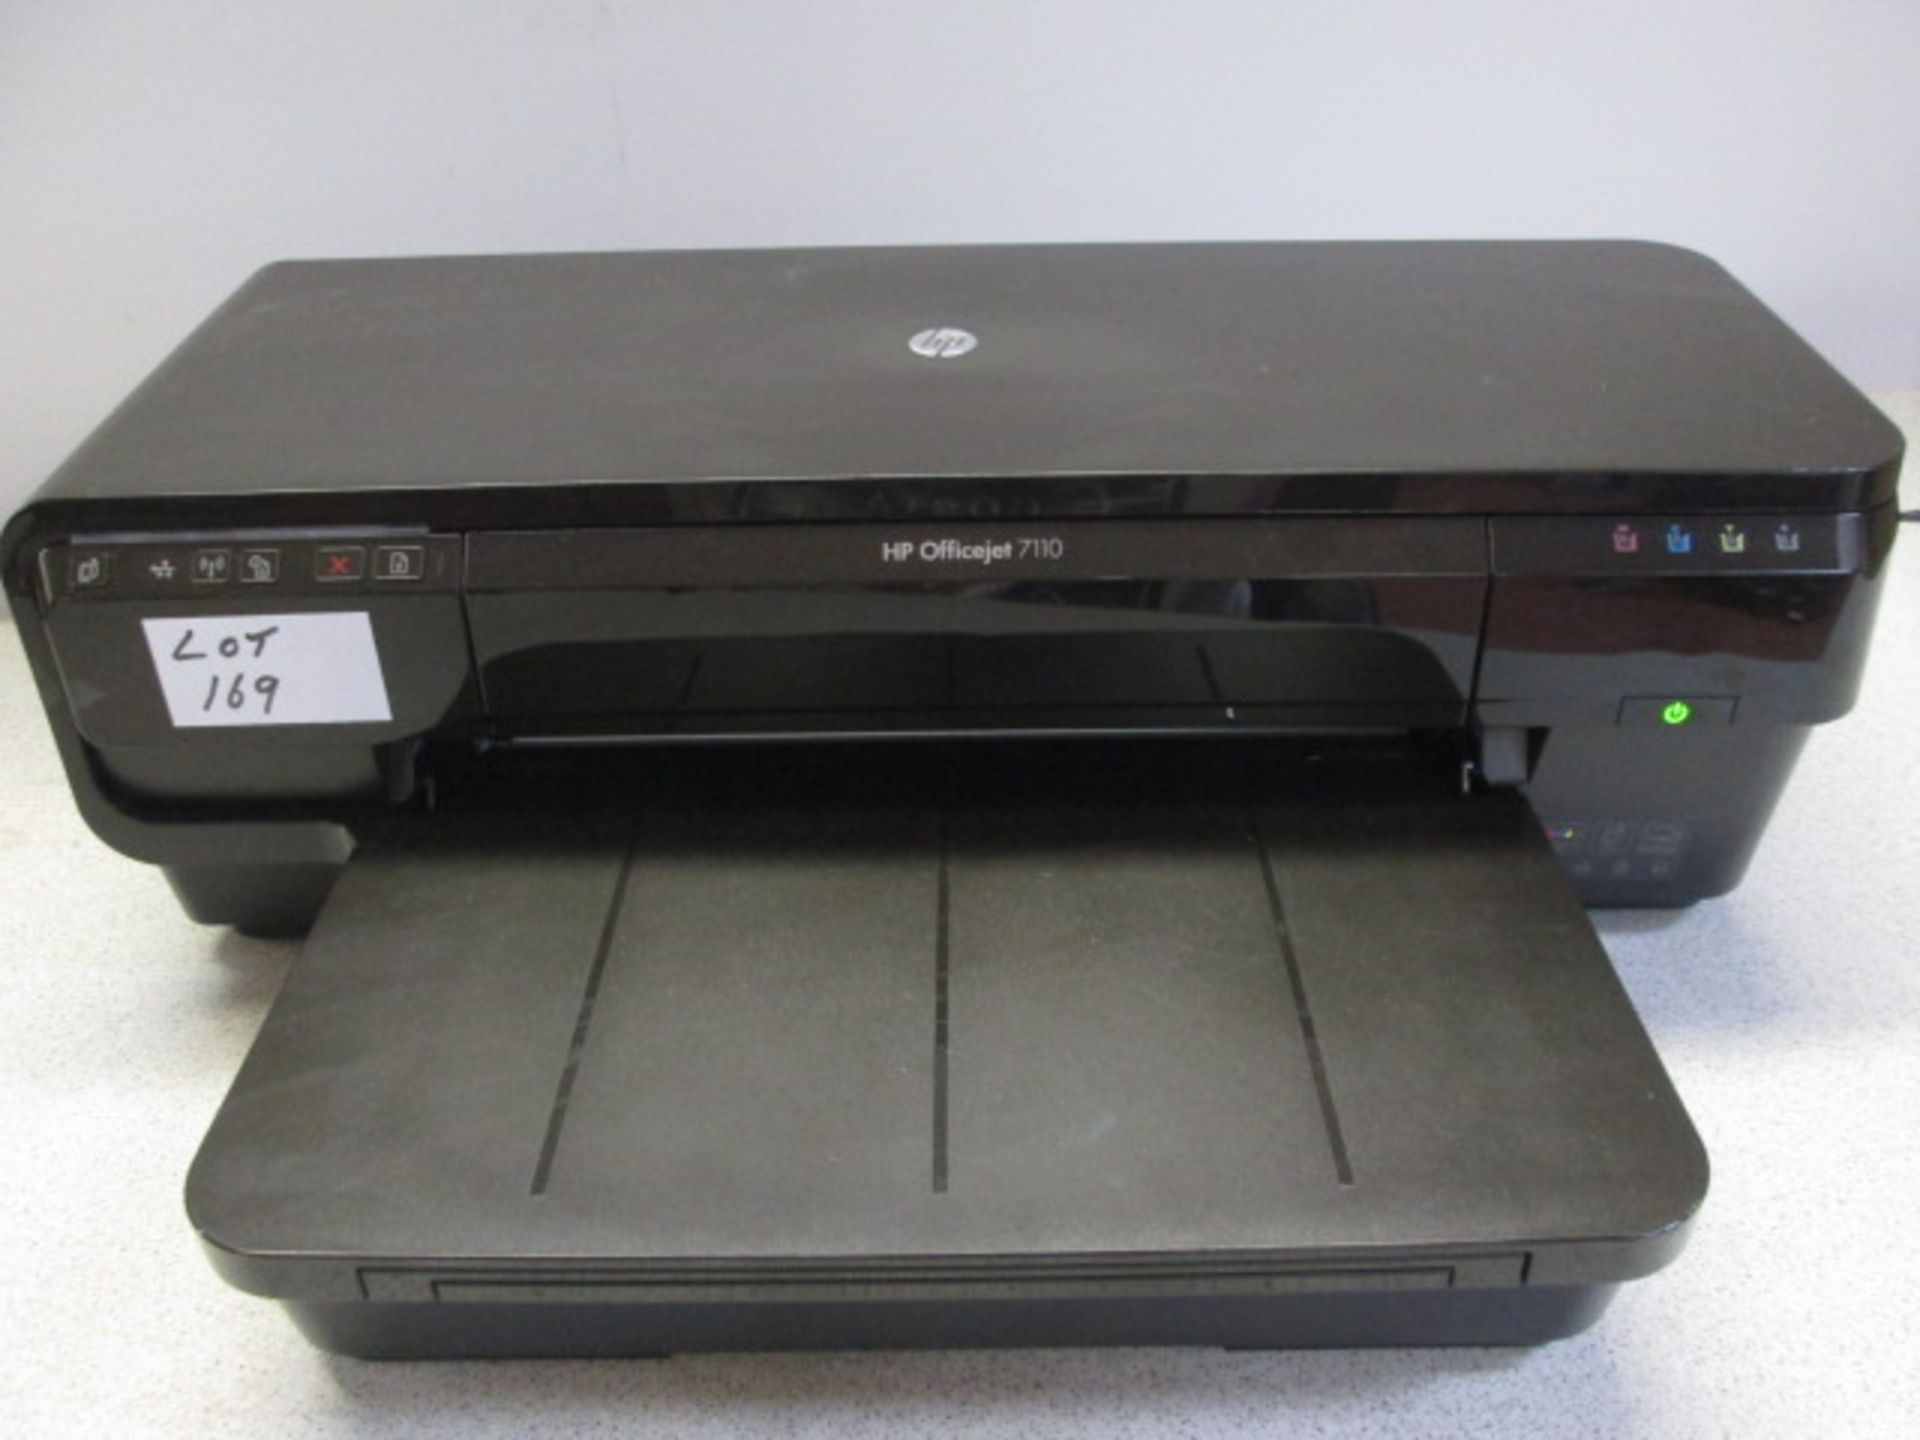 HP Officejet 7110 Colour Printer. Comes with Power Supply - Image 2 of 3